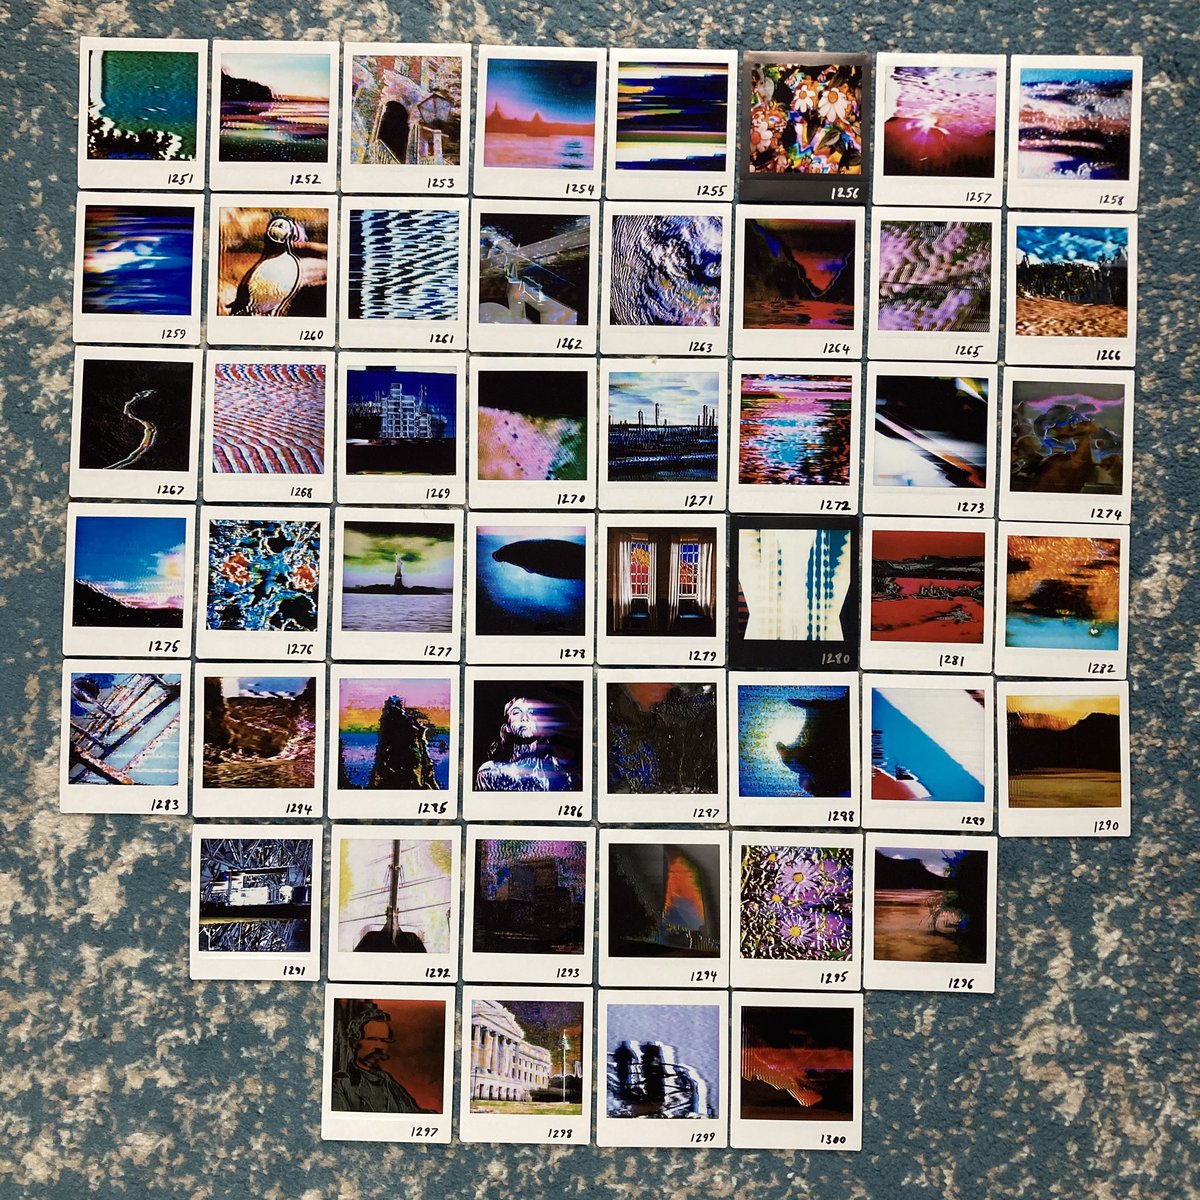 new batch of 1/1 instax prints just went onto aitso.org 10 canadian dollars is like 7 usd